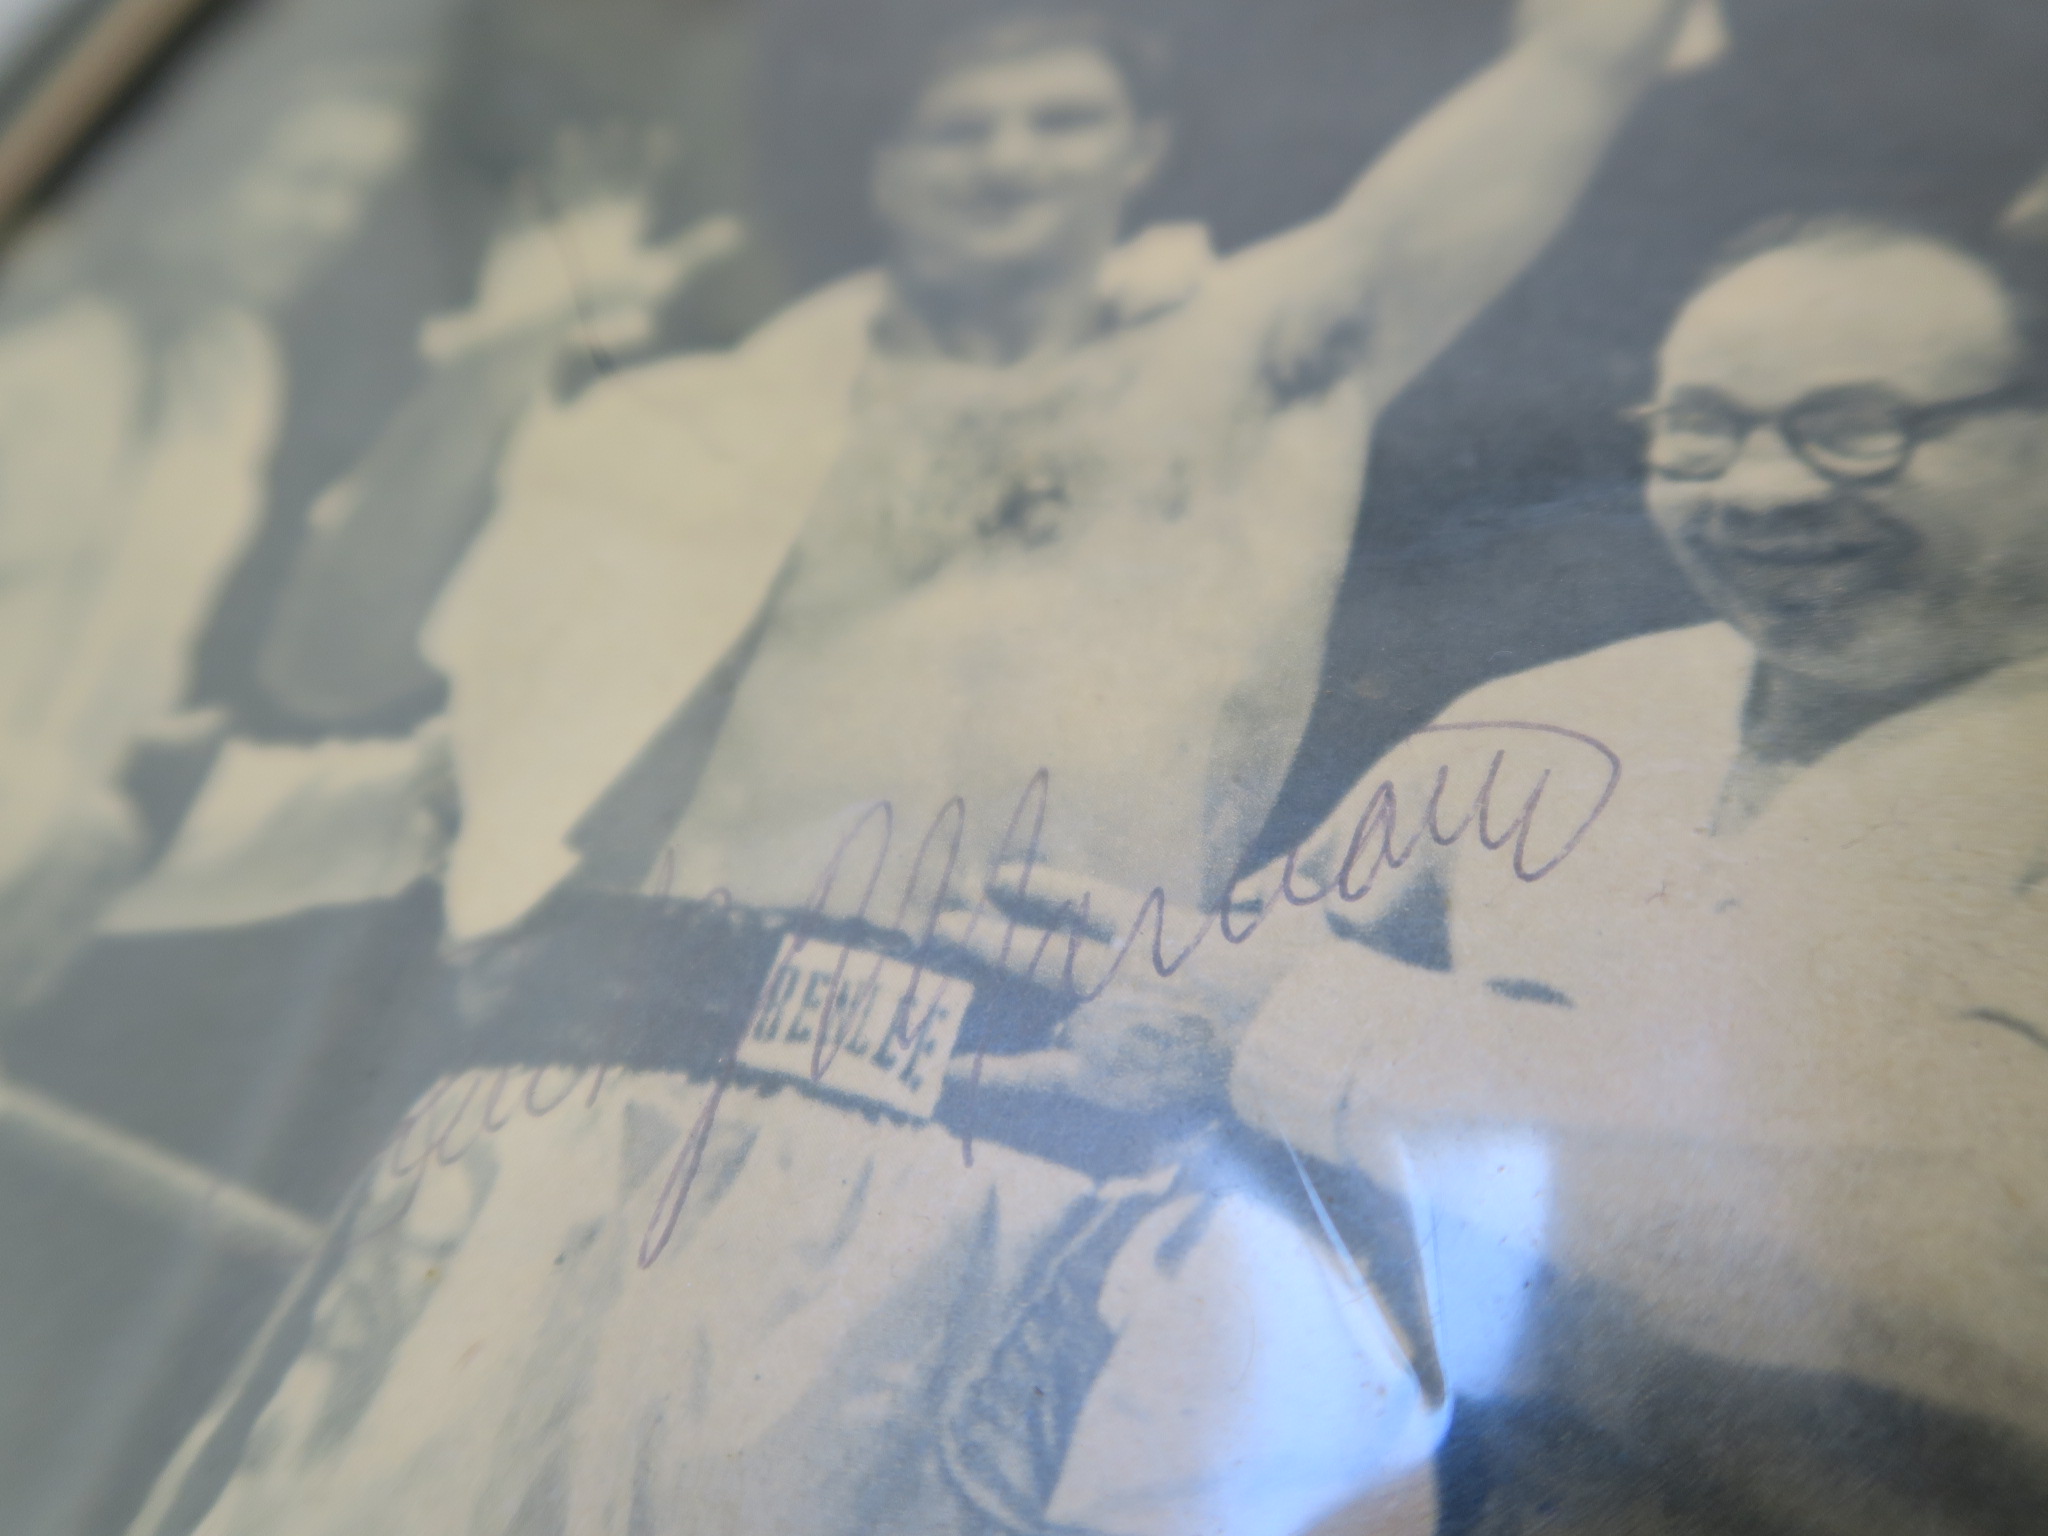 Rocky Marciano original autograph of the unbeaten World Heavyweight Champion. The autograph is on - Image 3 of 4